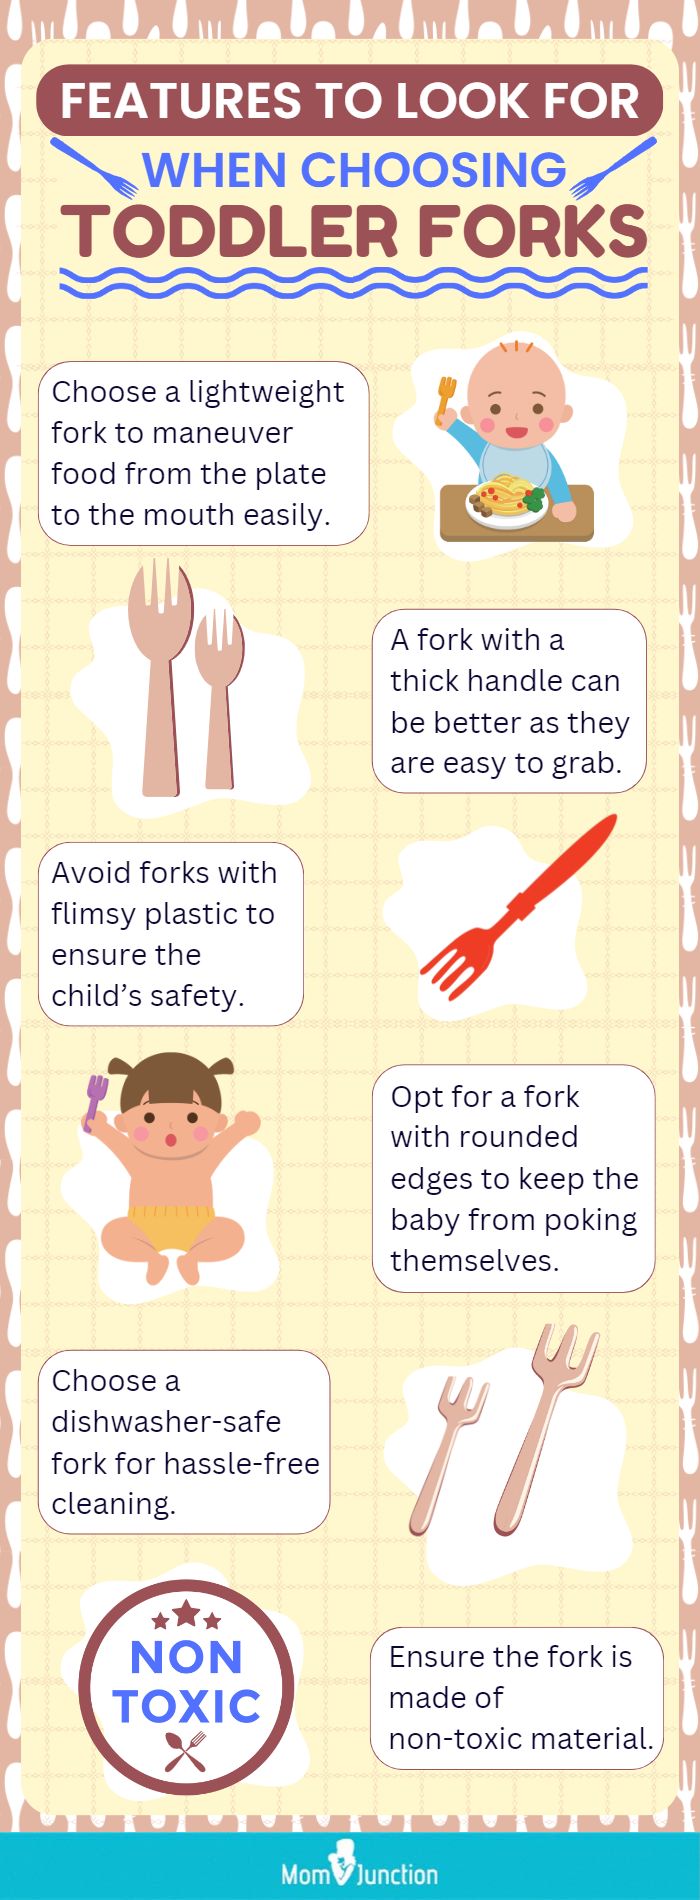 https://www.momjunction.com/wp-content/uploads/2023/01/Features-To-Look-For-When-Choosing-Toddler-Forks.jpg